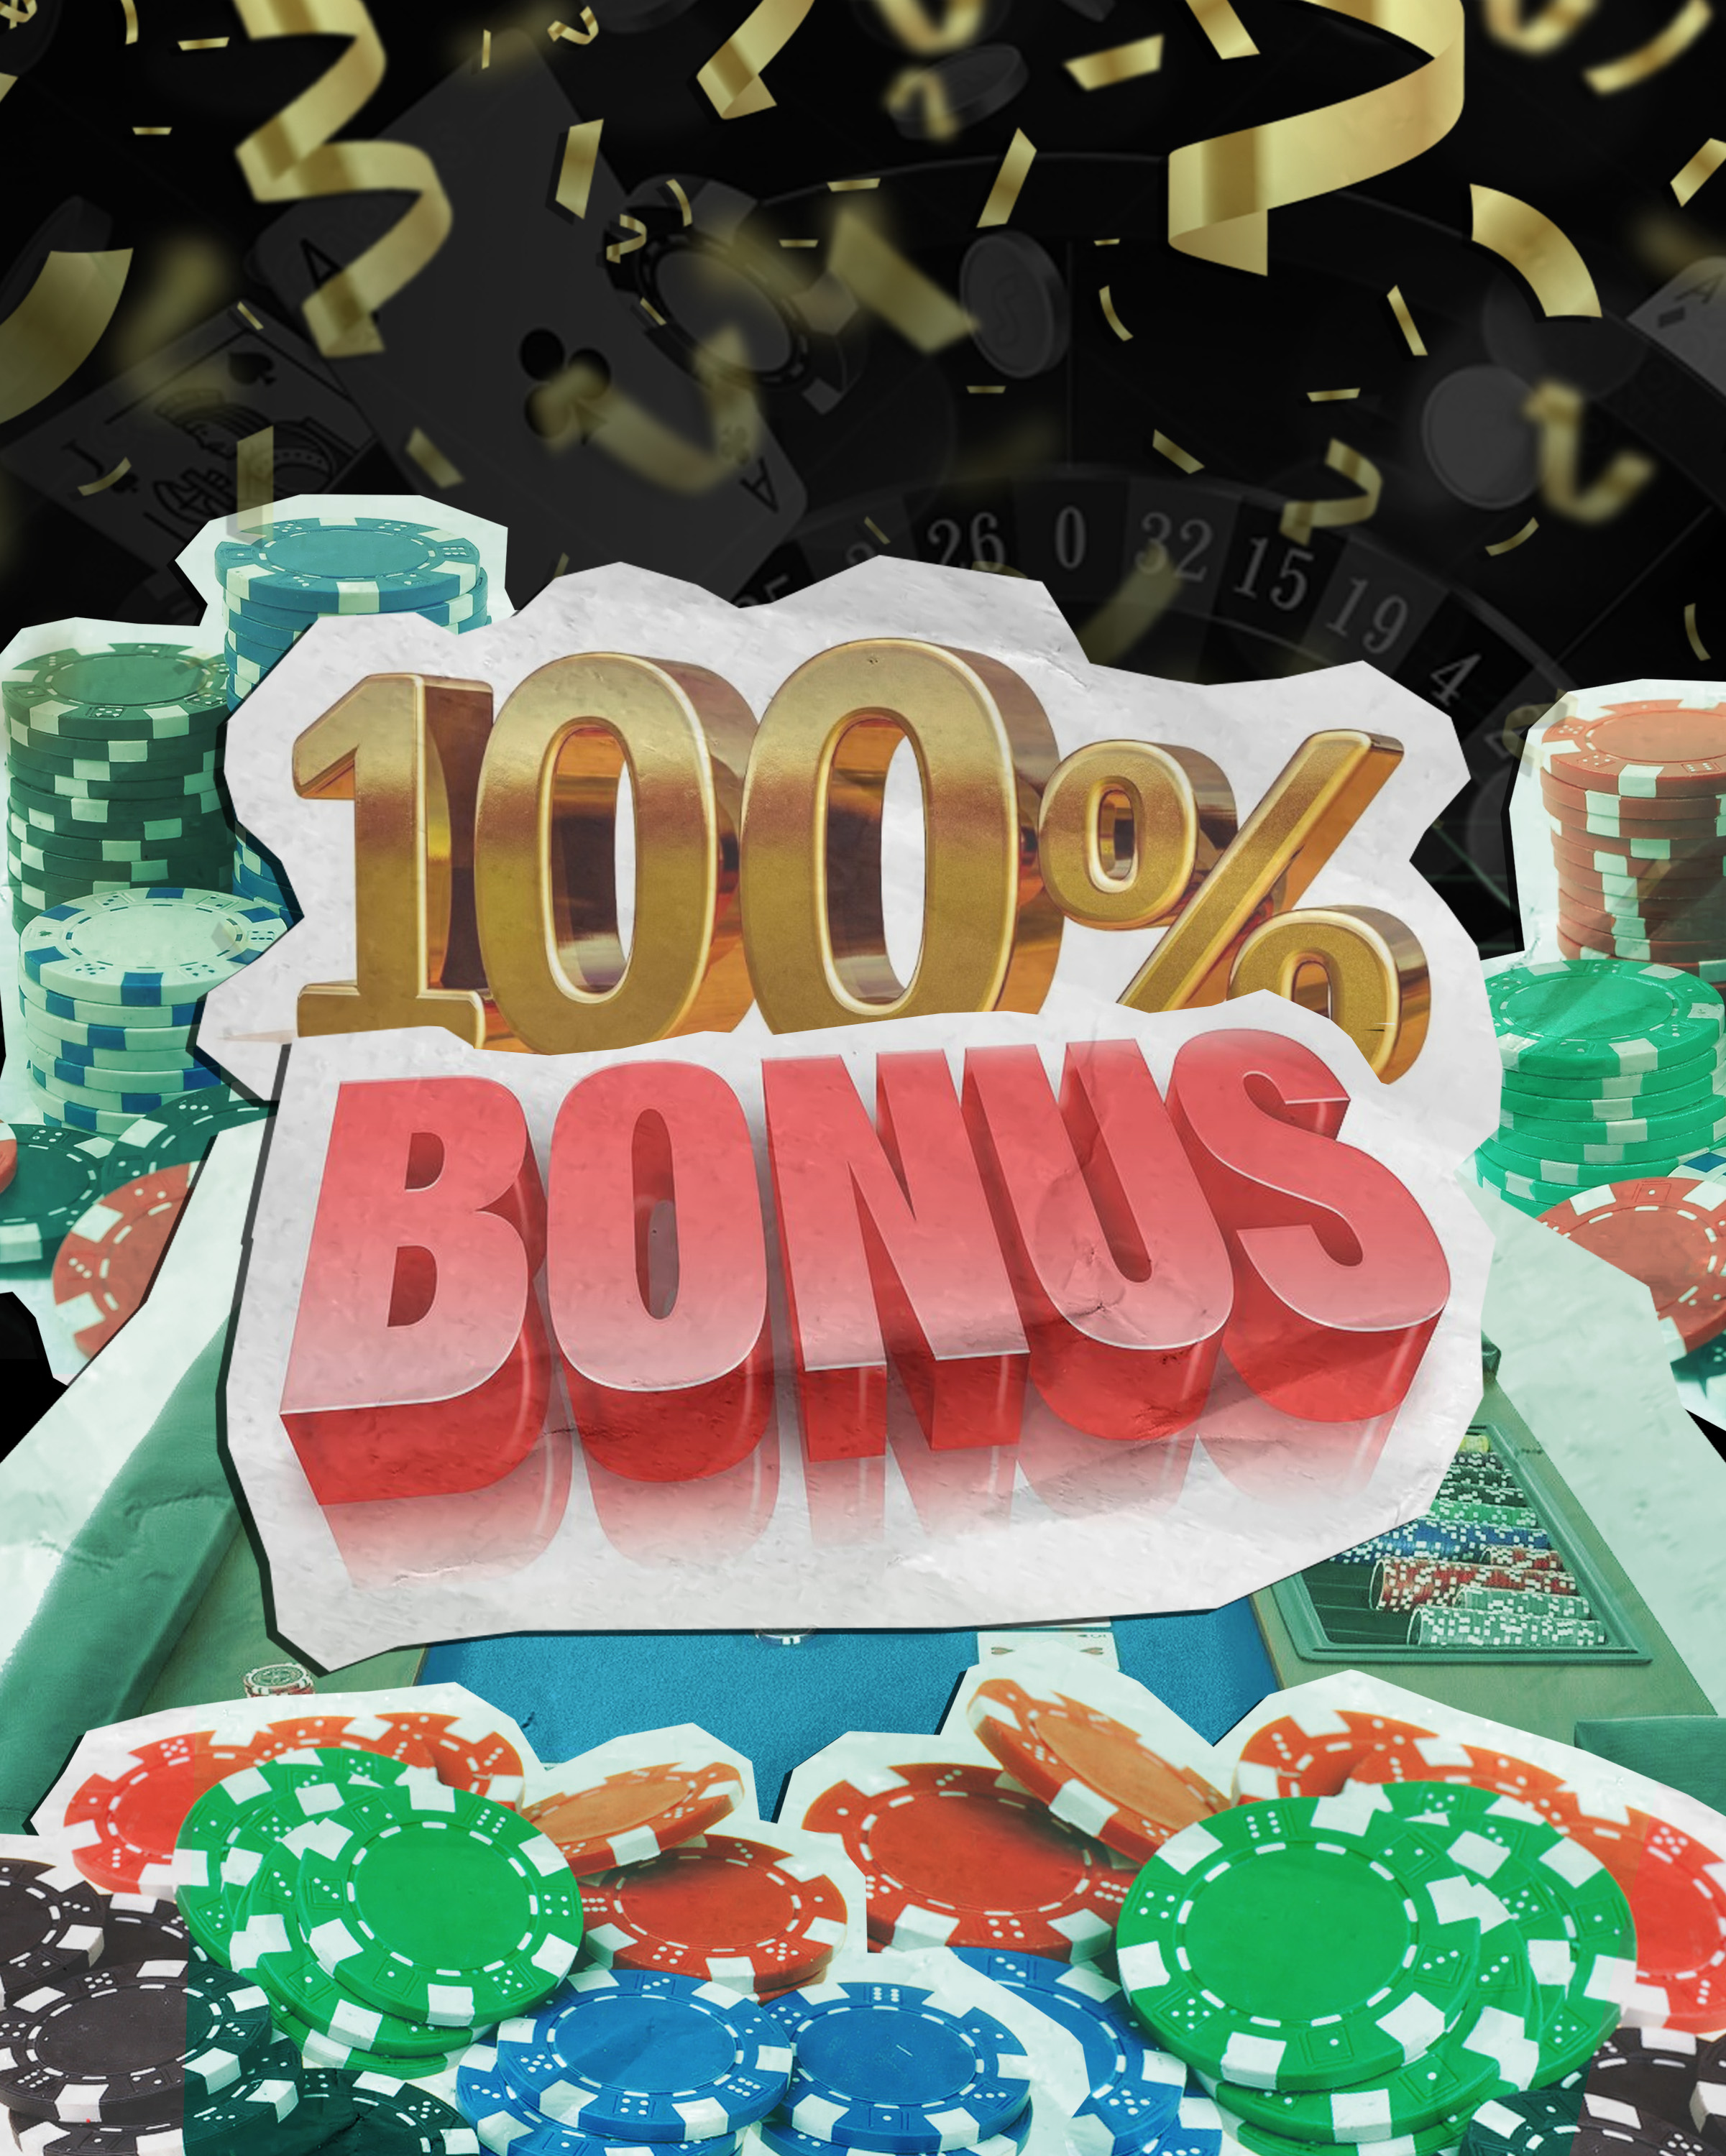 SPECIAL OFFER FOR NEW Players - 100% bonus on the first deposit